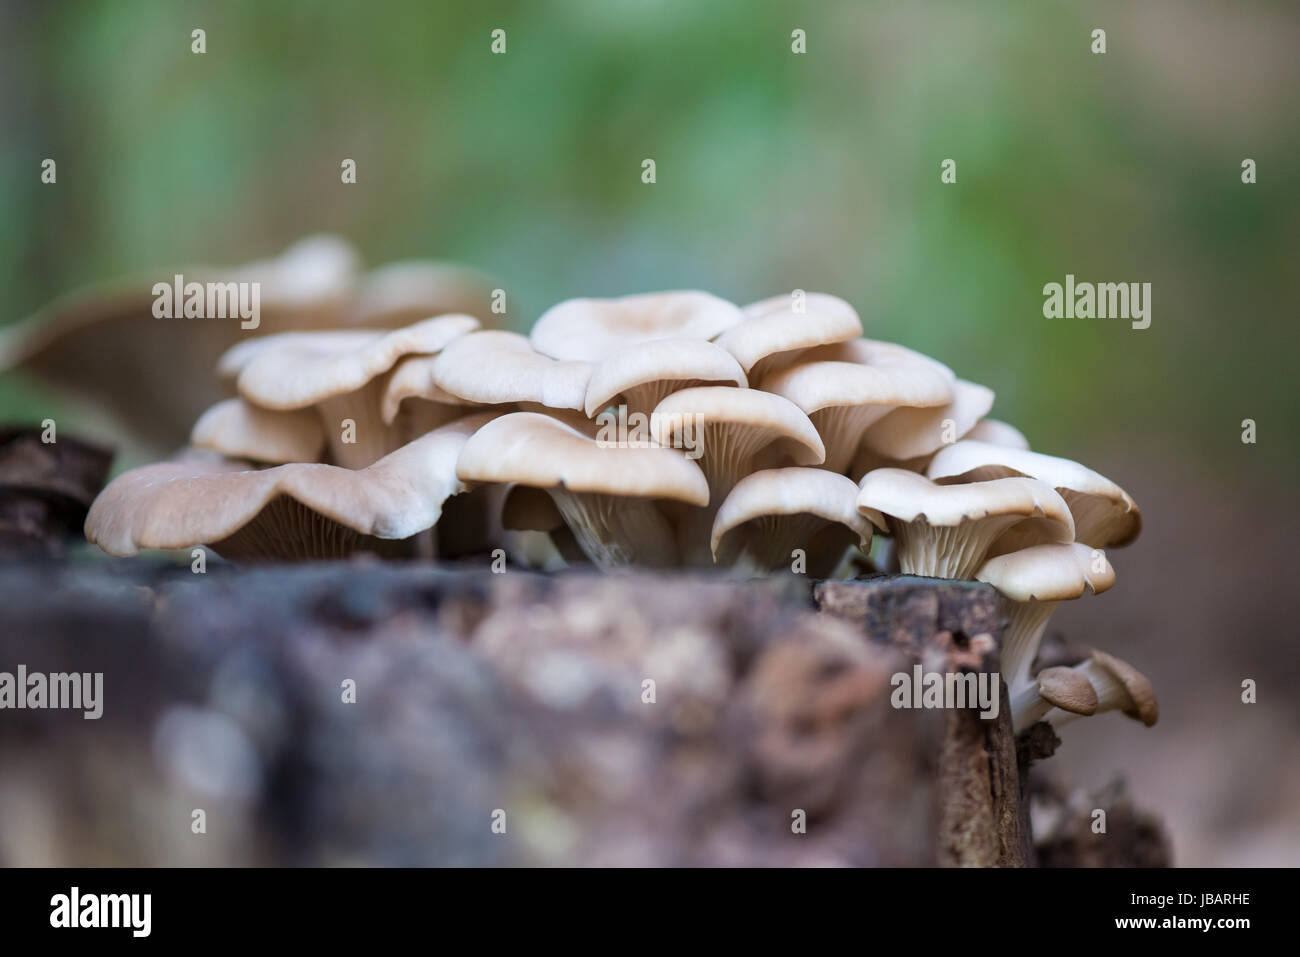 A cluster of cream, beige, or off-white, Oyster Mushrooms (Pleurotus ostreatus) growing on a decaying Poplar tree stump. Stock Photo